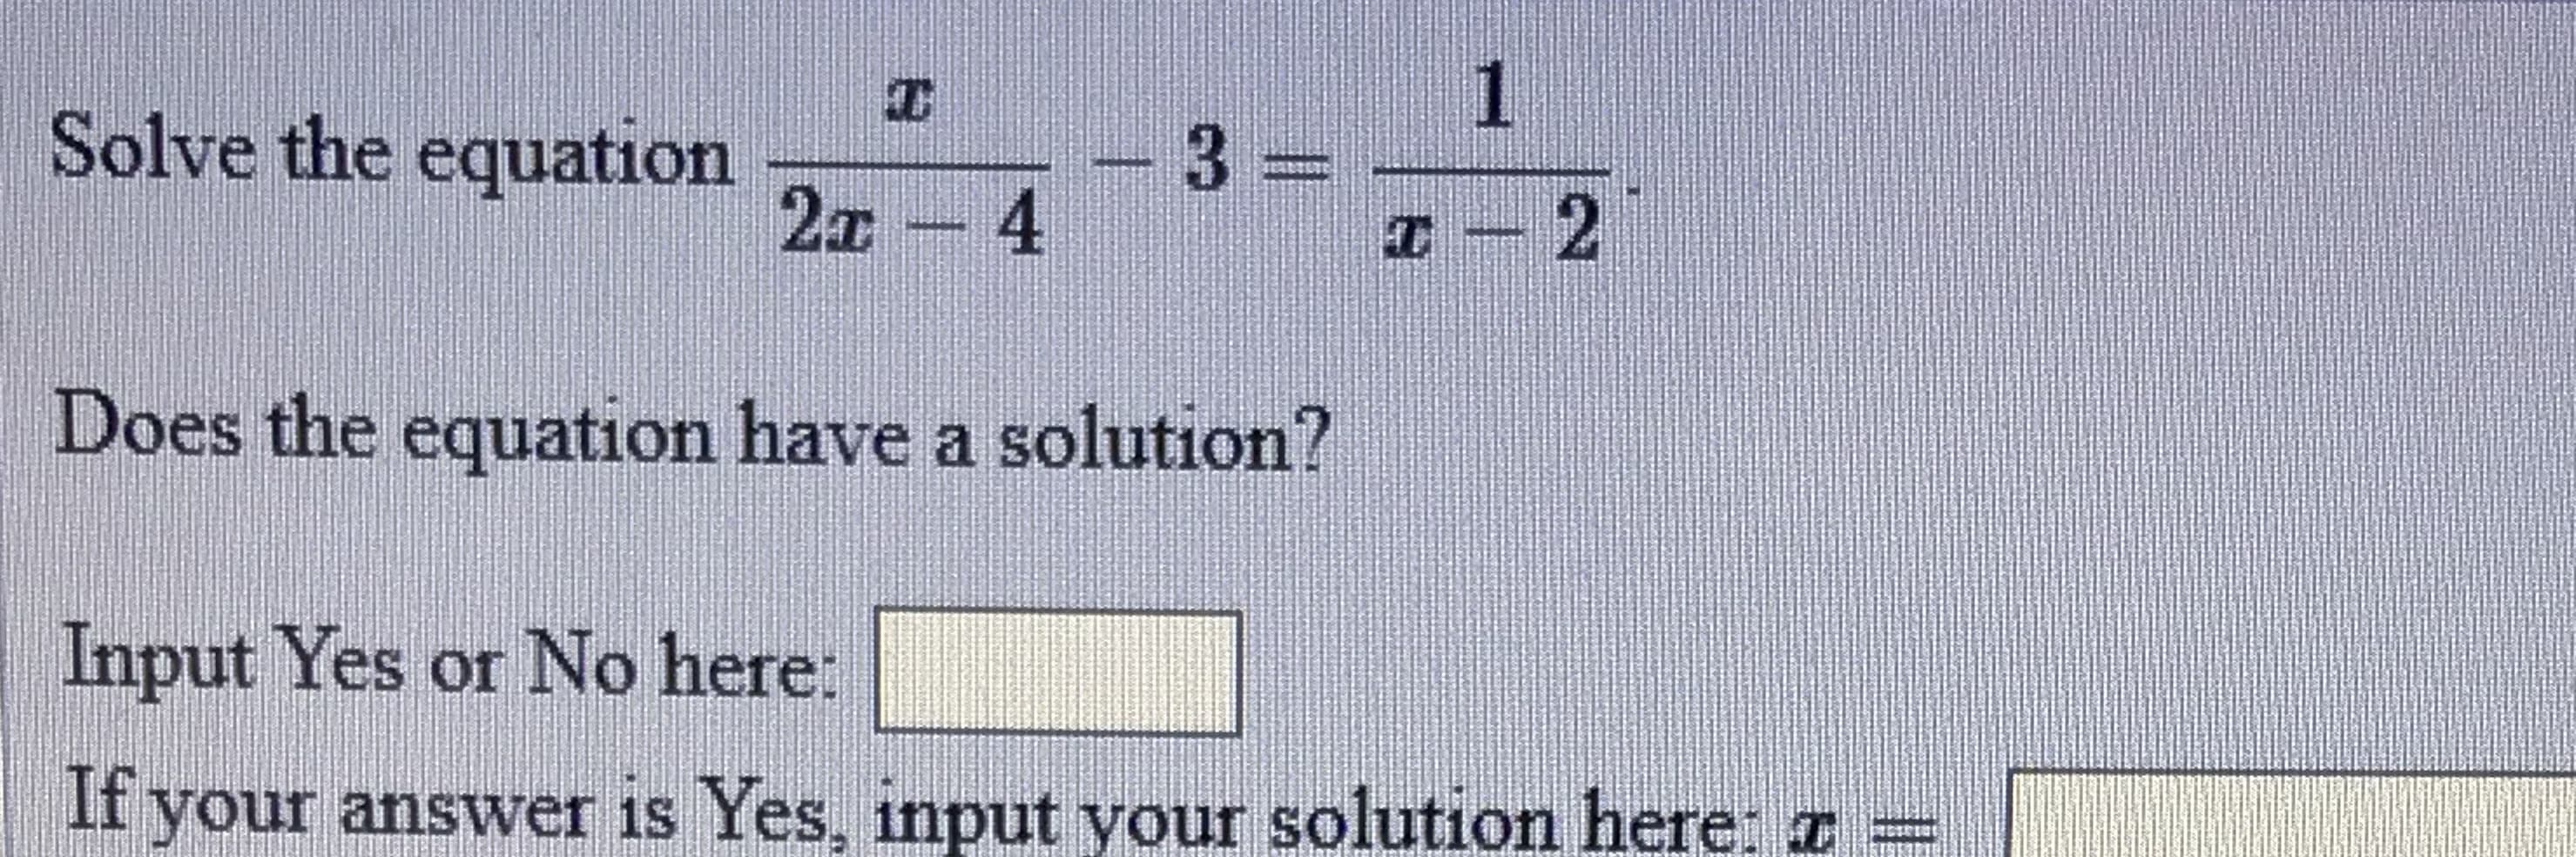 1
Solve the equation
2ェ-4
Does the equation have a solution?
Input Yes or No here:
If your answer is Yes, input your solution here z=
|3|
